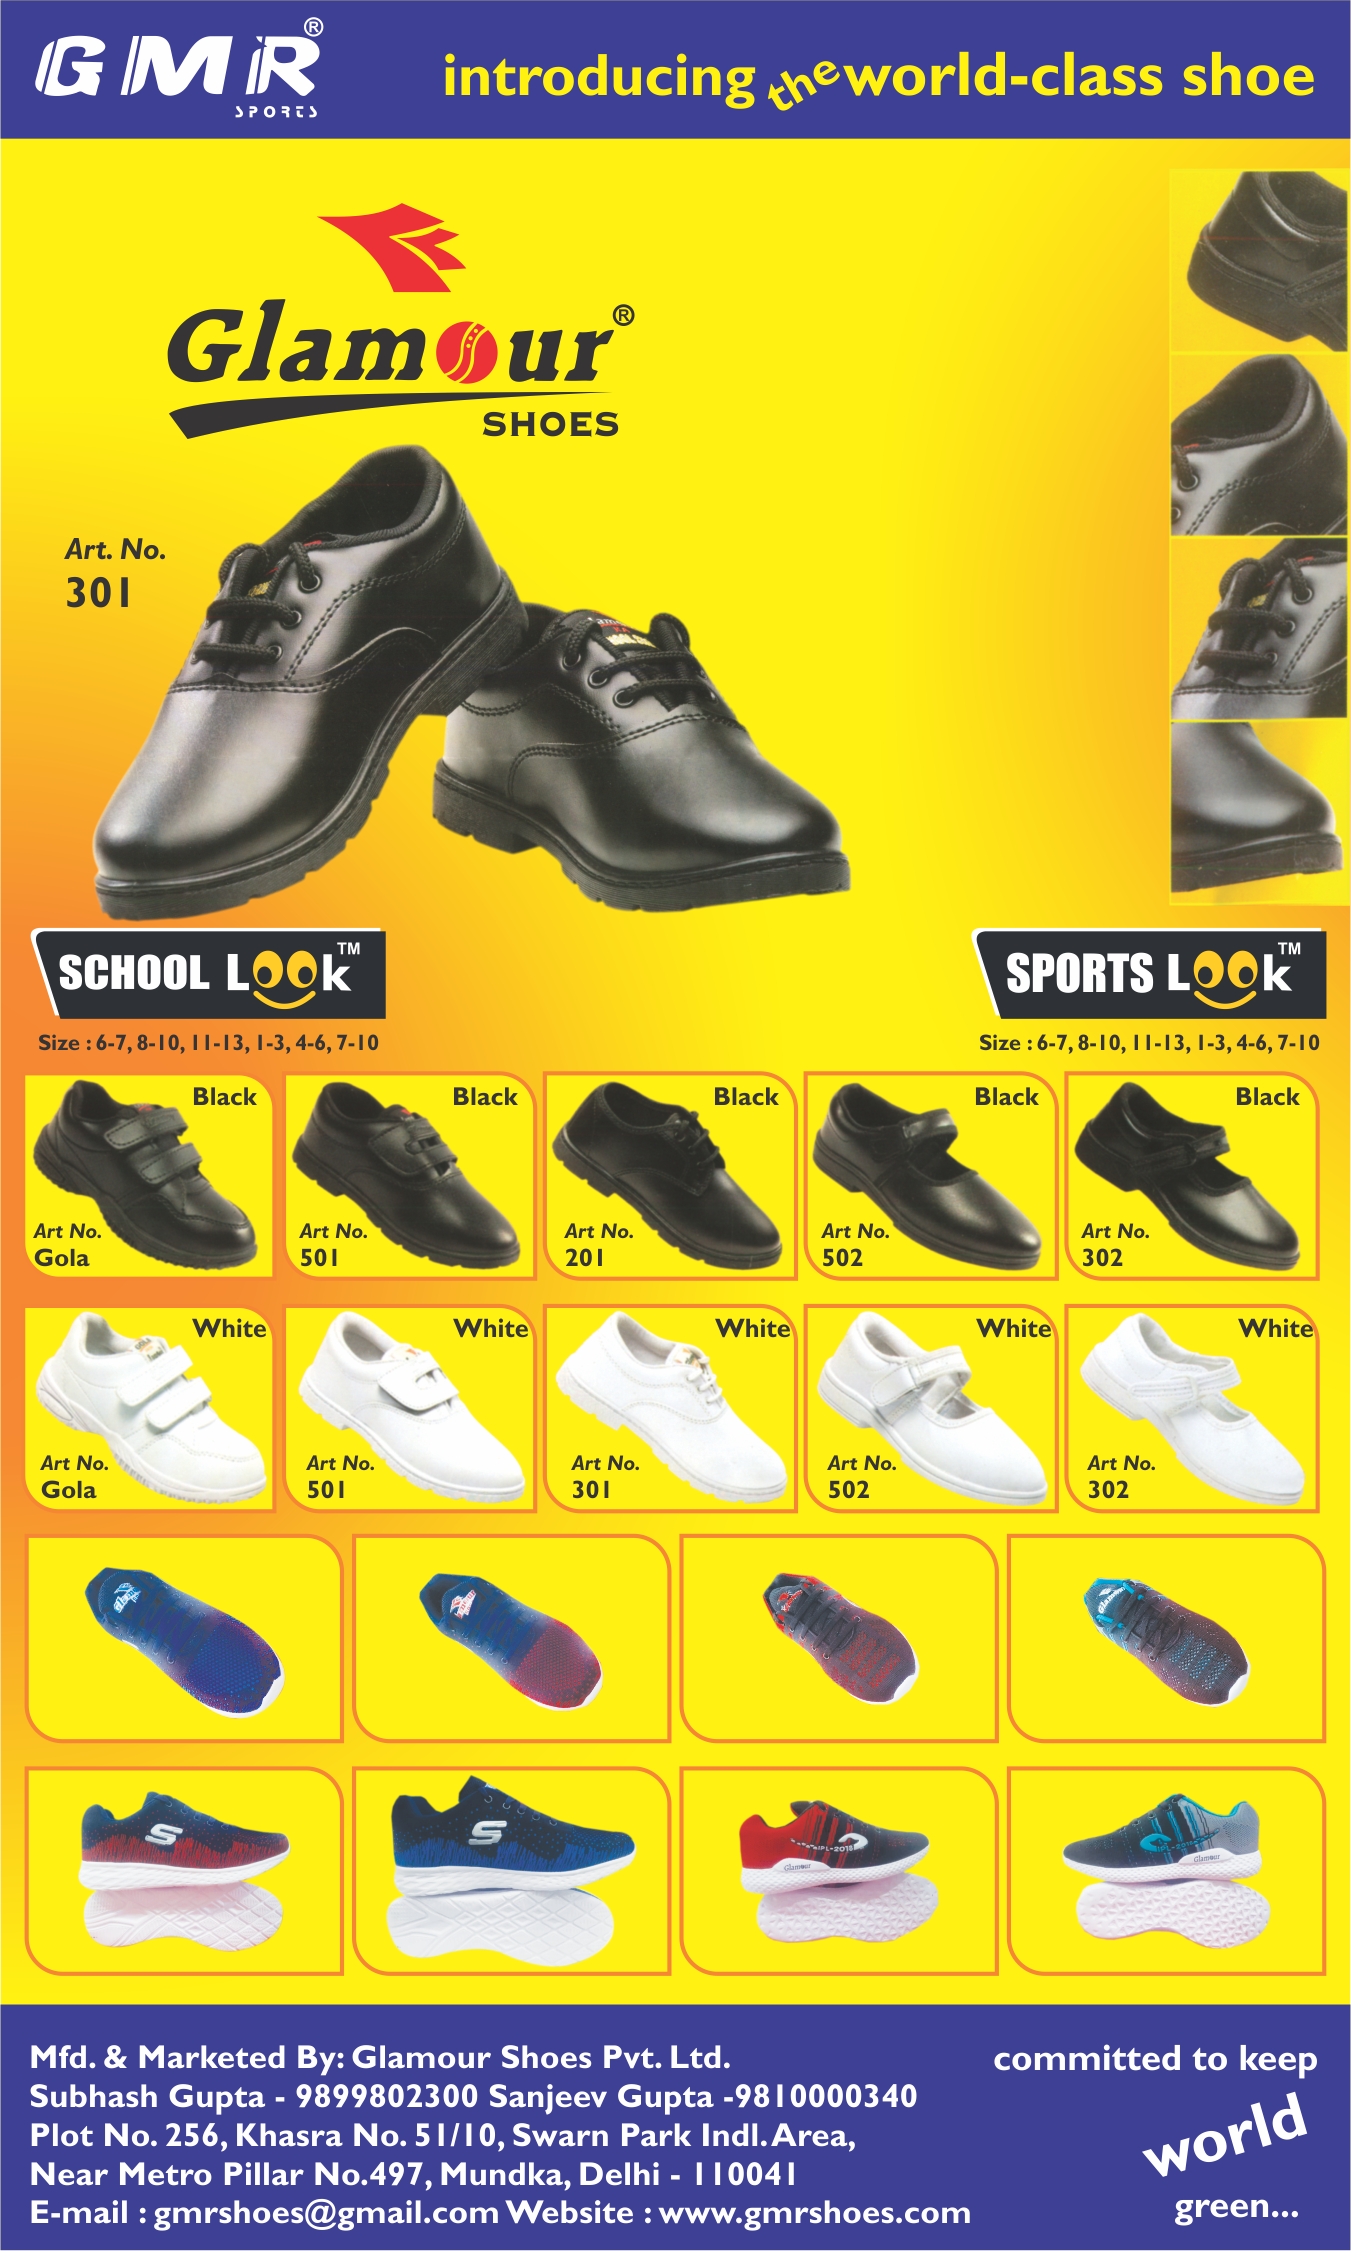 Glamour Shoes Pvt Ltd | Footwear Manufacturers In India | Stationery |  Trade Linker